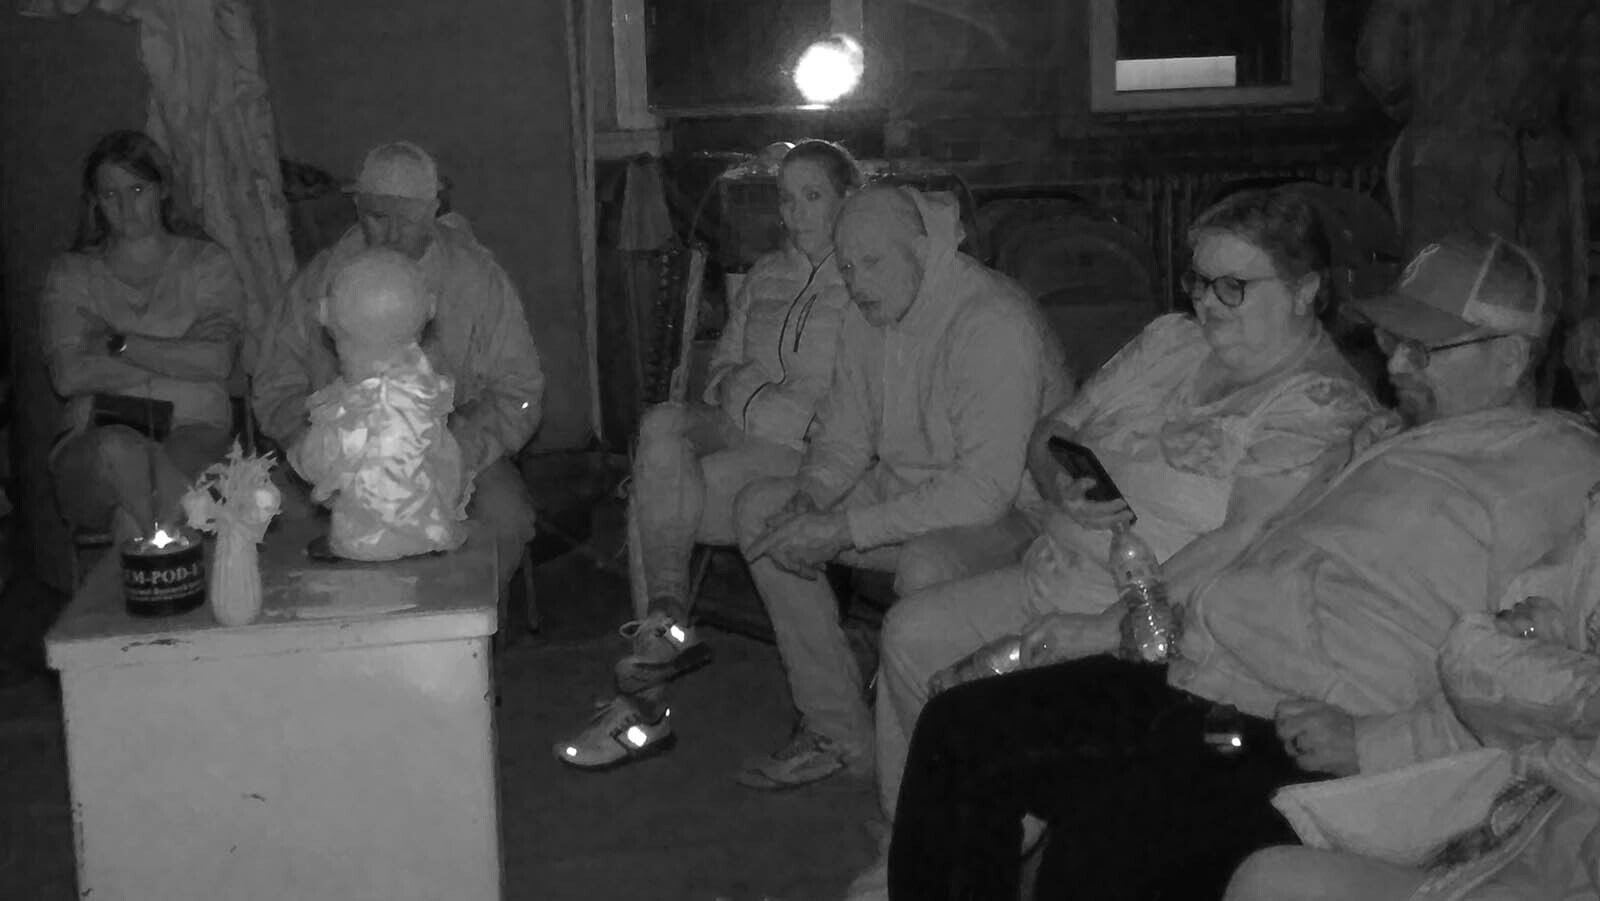 A group of paranormal investigators sit in the dark around an Ovilus doll in the basement of the Knights of Pythias building in Cheyenne. Some believe that when the doll is asked questions, it channels answers form the beyond.